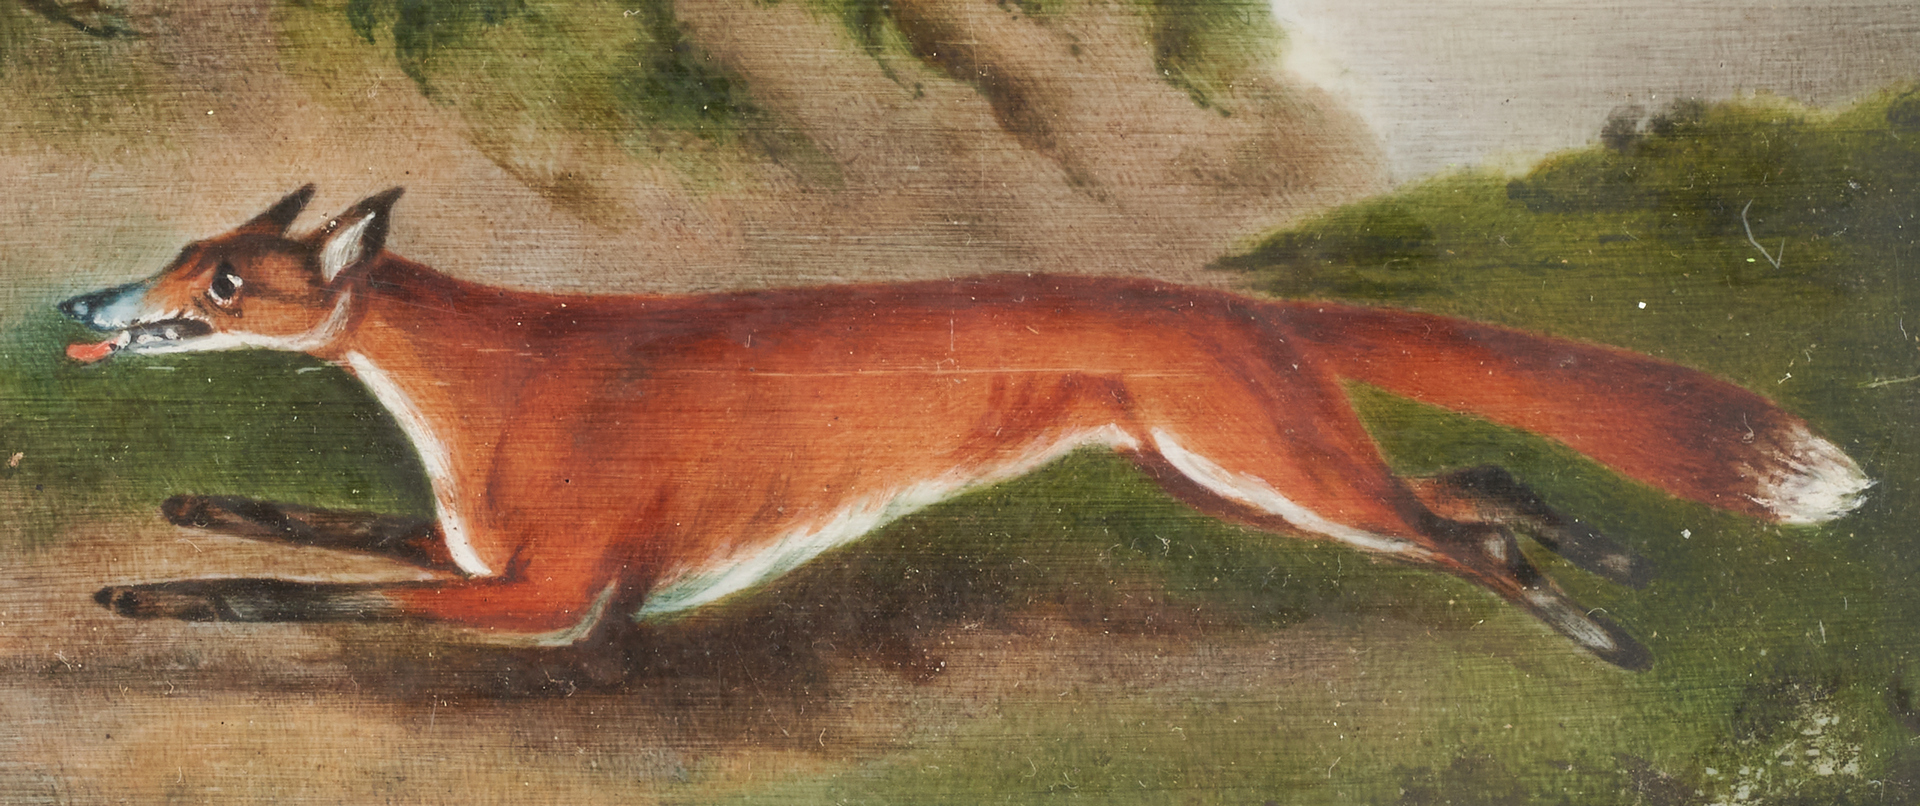 Lot 158: Attr. A. Chalon, Miniature Painting of a Fox